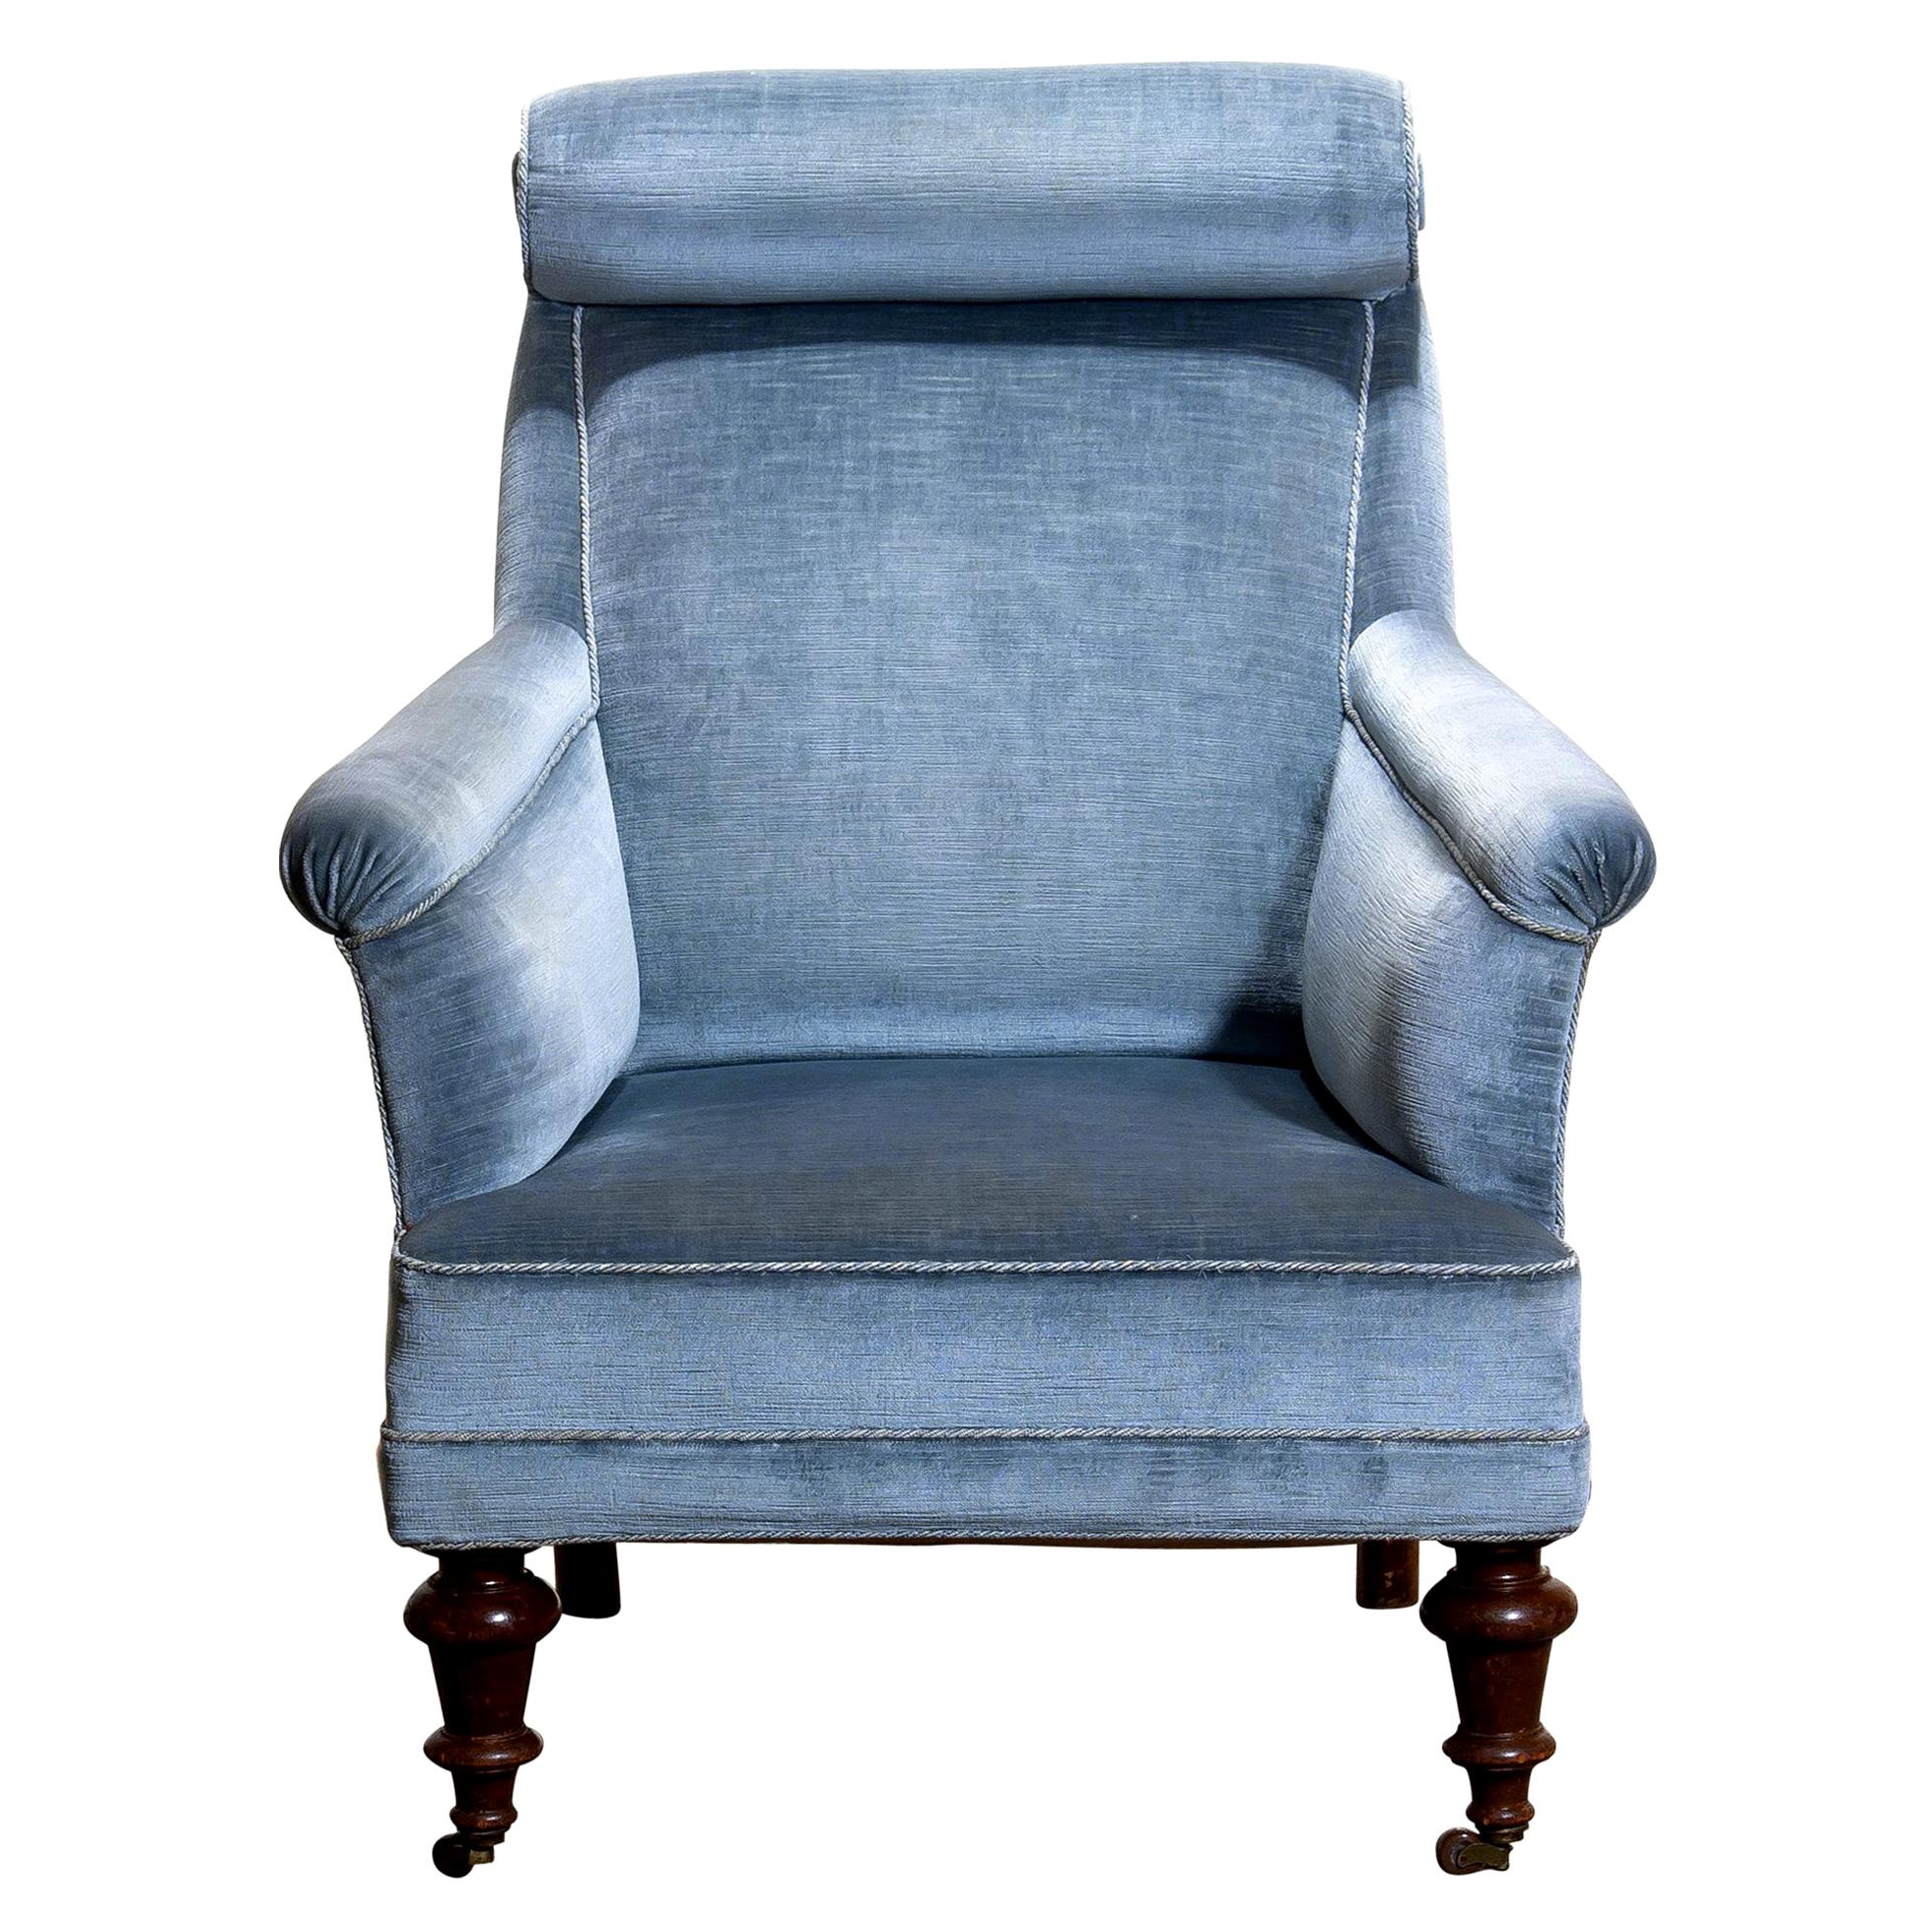 Rare and extremely comfortable / beautiful bergère or lounge chair in Dorothy draper style from the turn to the 20th century.
Upholstered in ice blue velvet and in good condition.

Period: 1900.